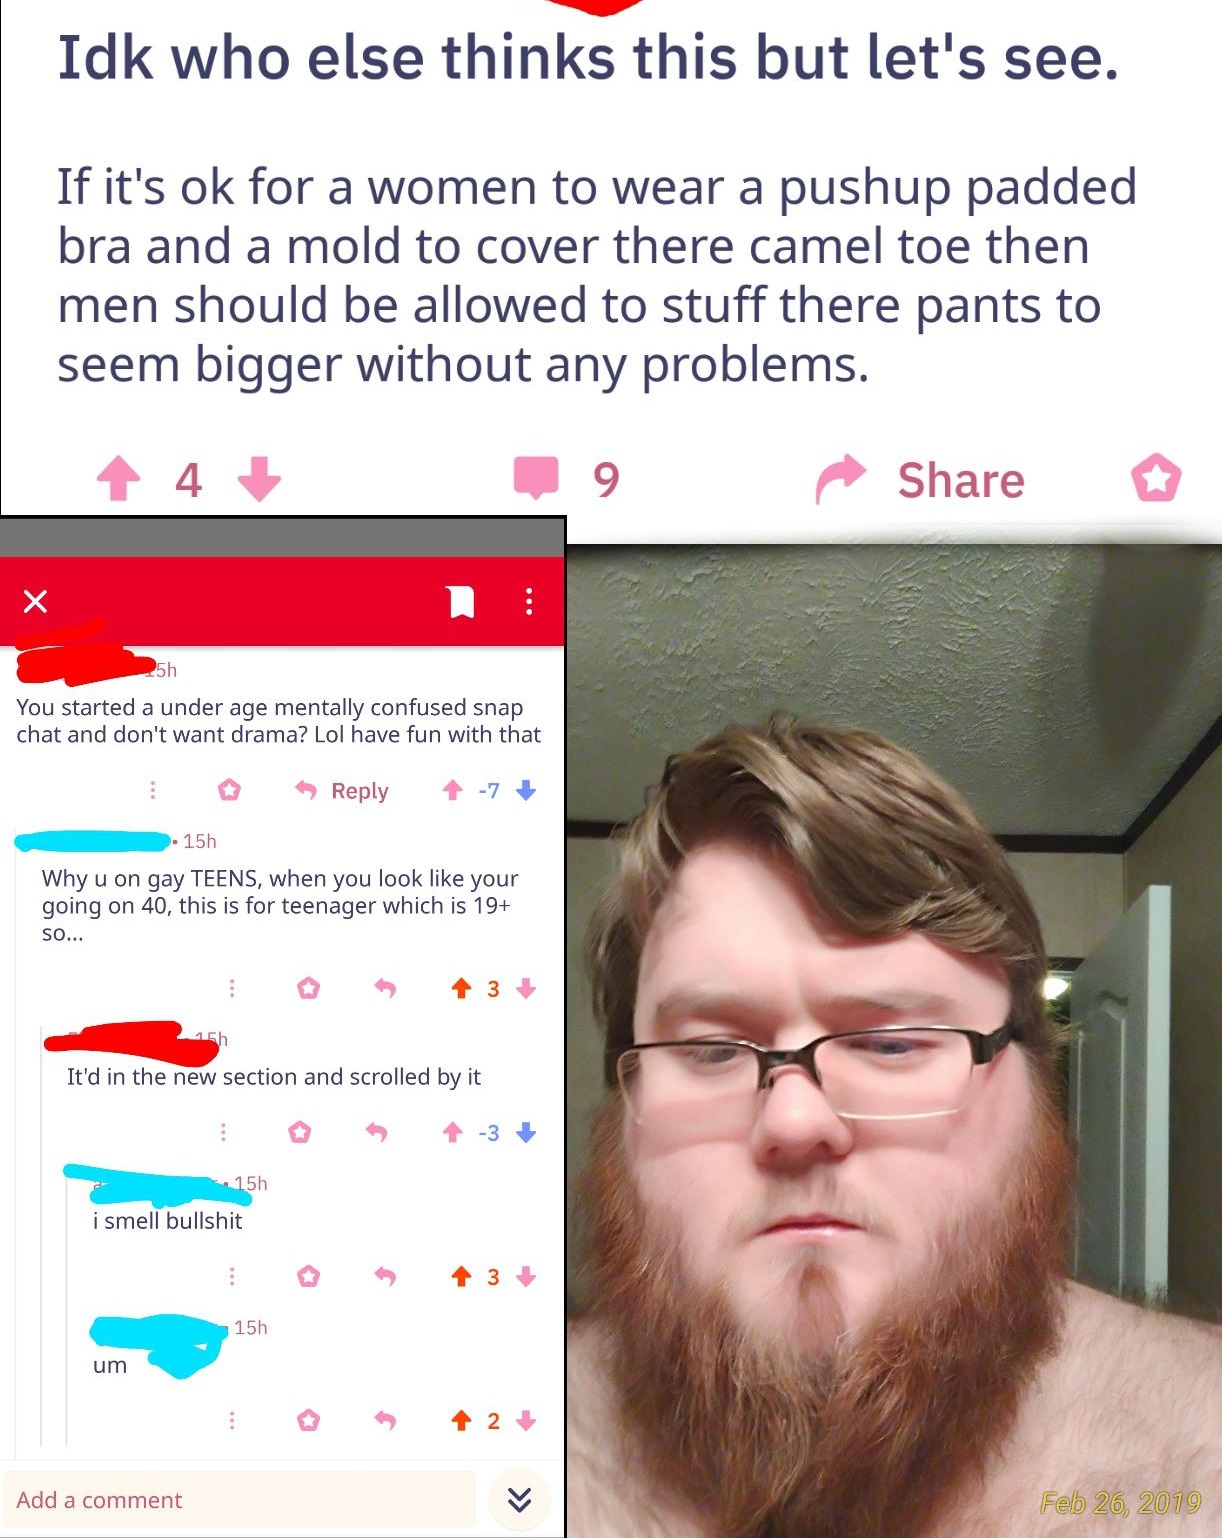 fat man with beard and glasses - Idk who else thinks this but let's see. If it's ok for a women to wear a pushup padded bra and a mold to cover there camel toe then men should be allowed to stuff there pants to seem bigger without any problems. 4 4 19 5h 